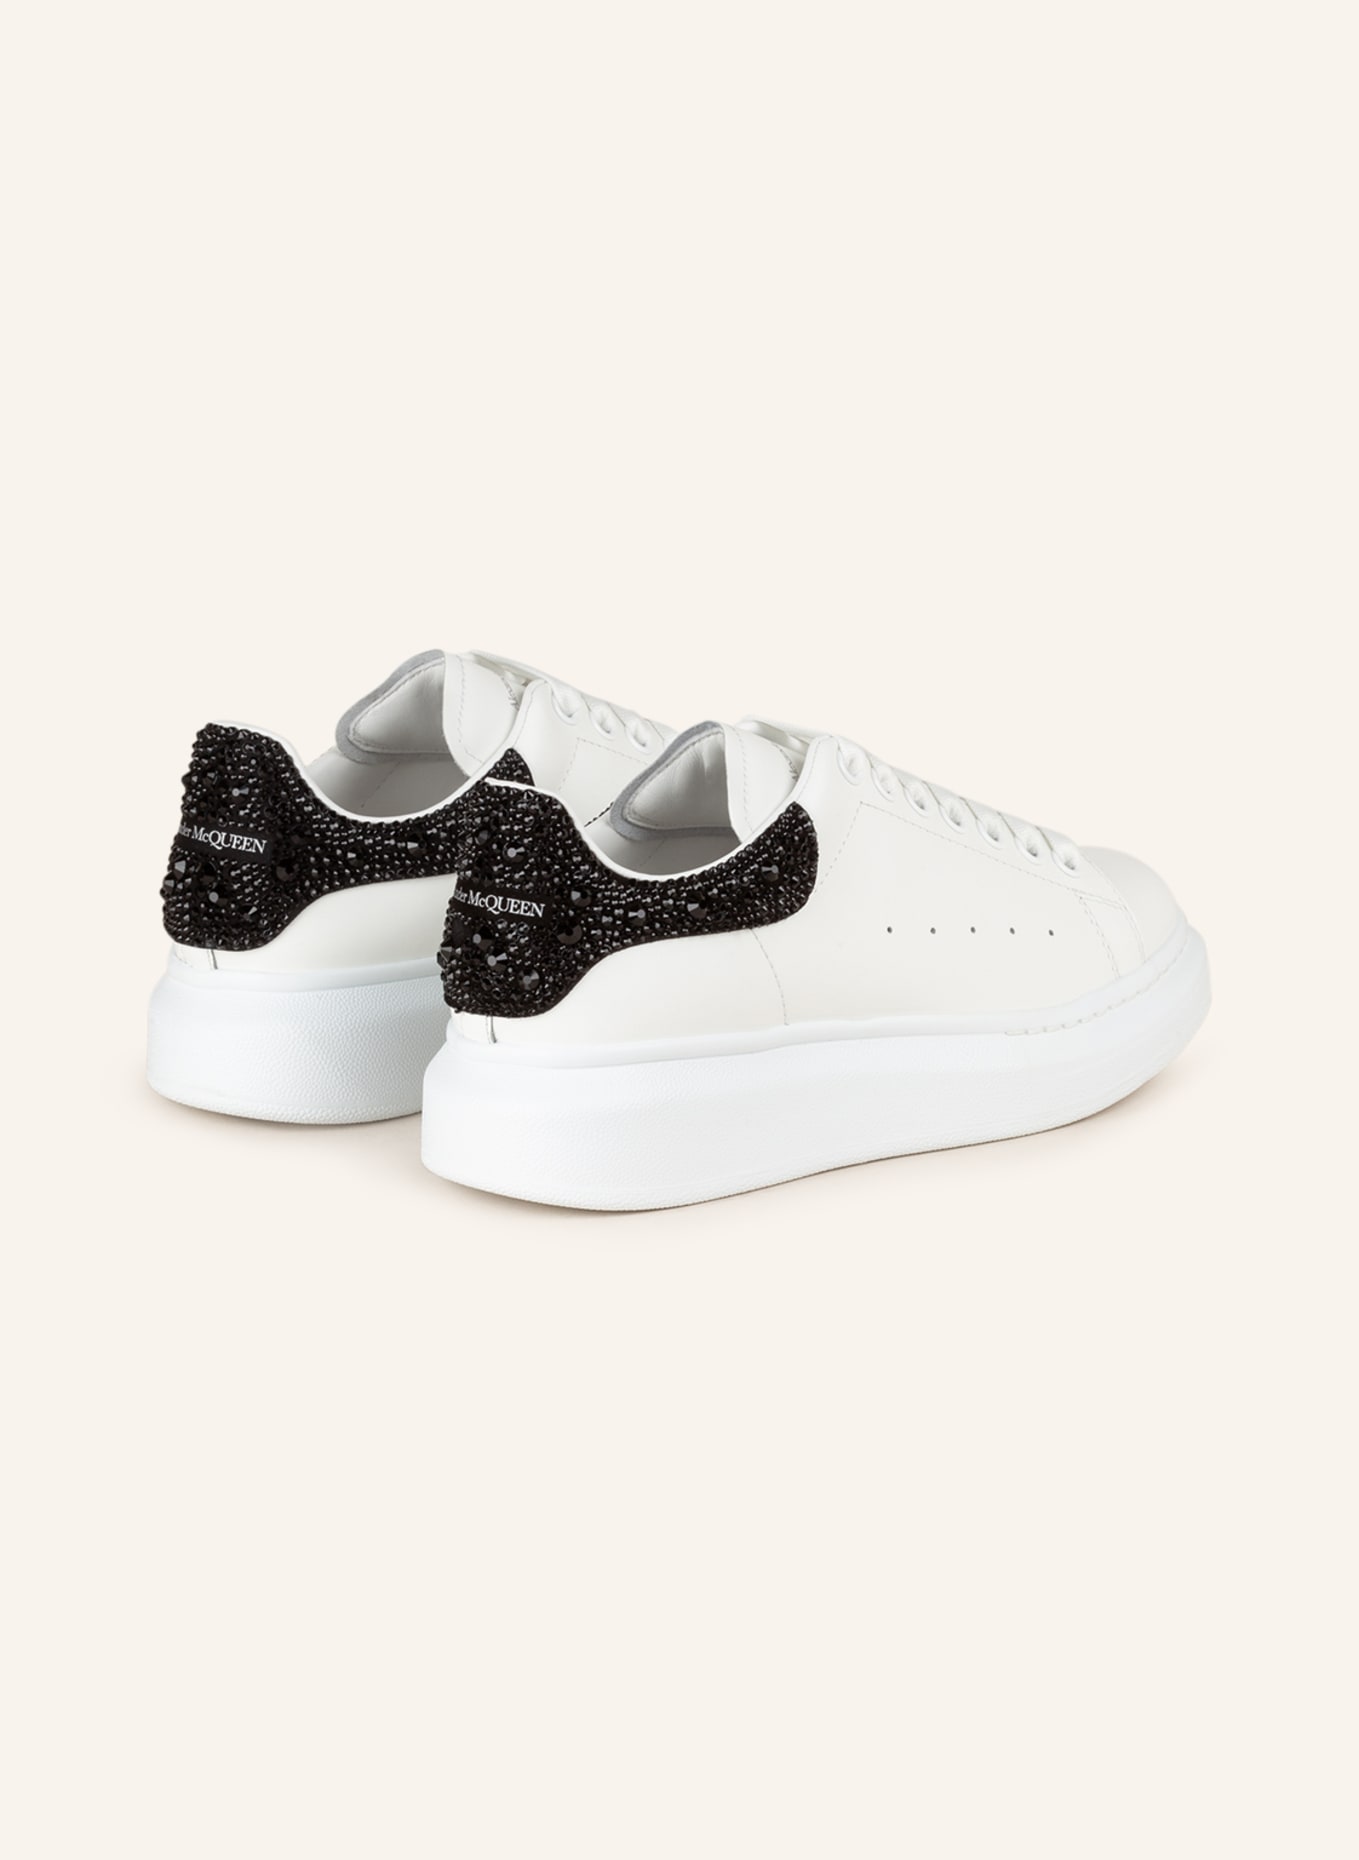 ALEXANDER MCQUEEN Perforated two-tone leather sneakers | Sale up to 70% off  | THE OUTNET